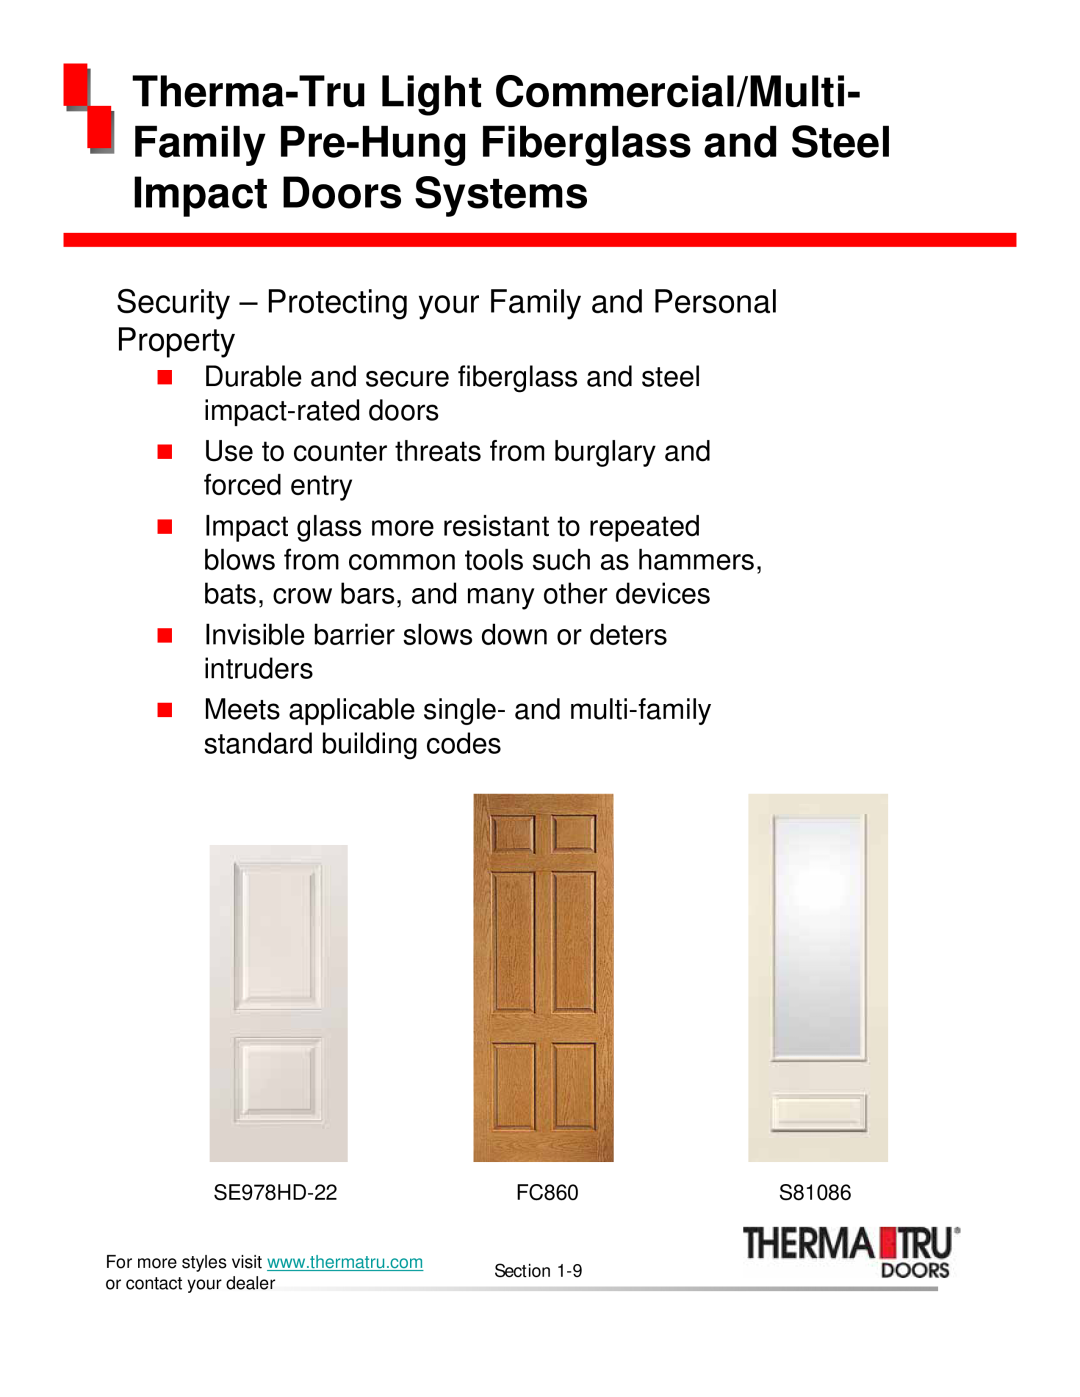 Therma-Tru none manual Family Pre-HungFiberglass and Steel, Impact Doors Systems, Therma-TruLight Commercial/Multi 